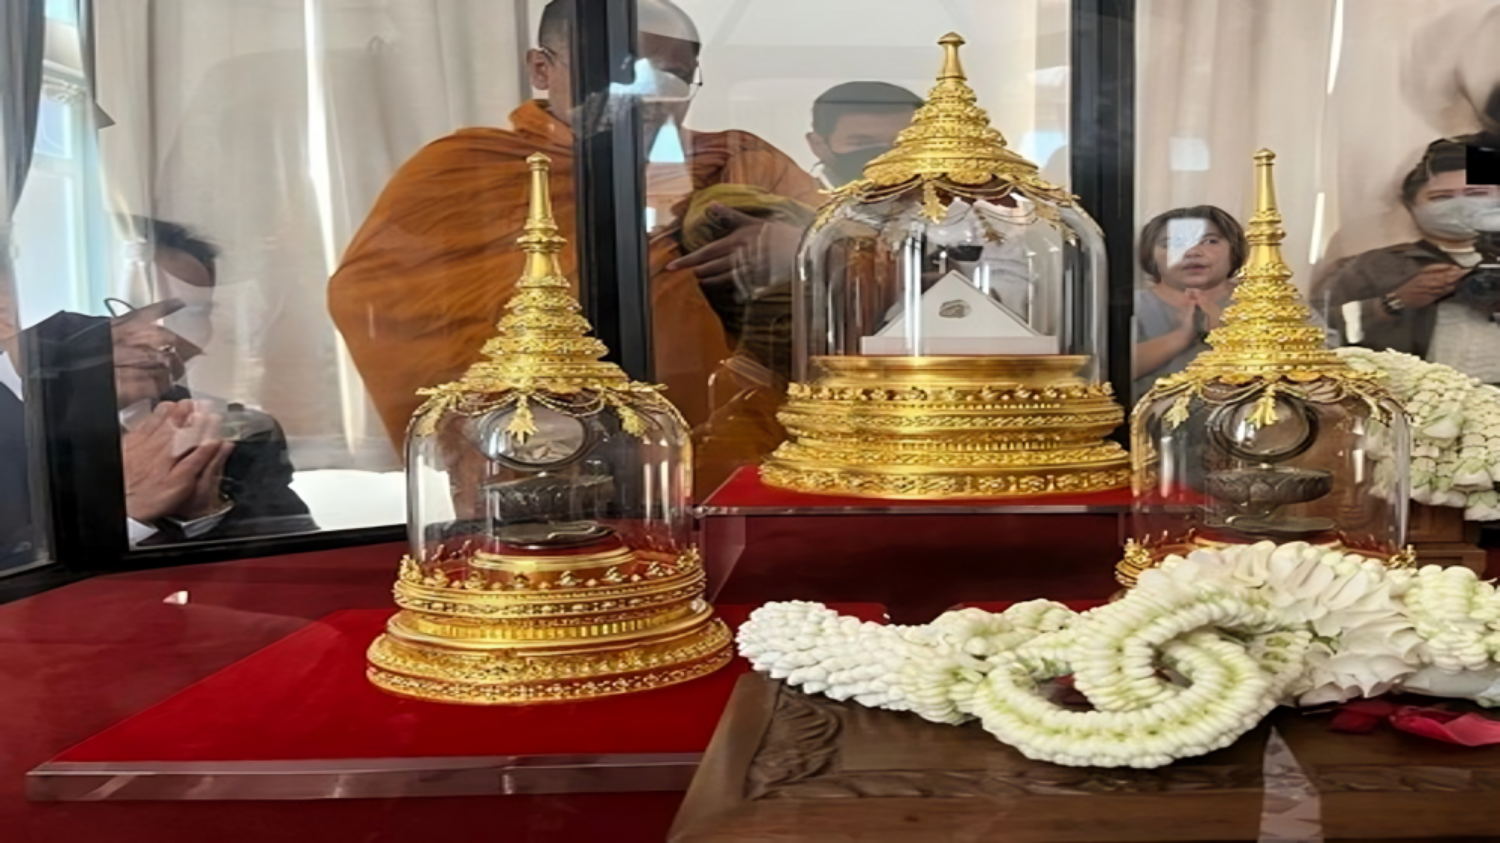 Grand spectacle of holy procession: Relics of Lord Buddha to be temporarily enshrined in Bangkok Royal Ground की तस्वीर